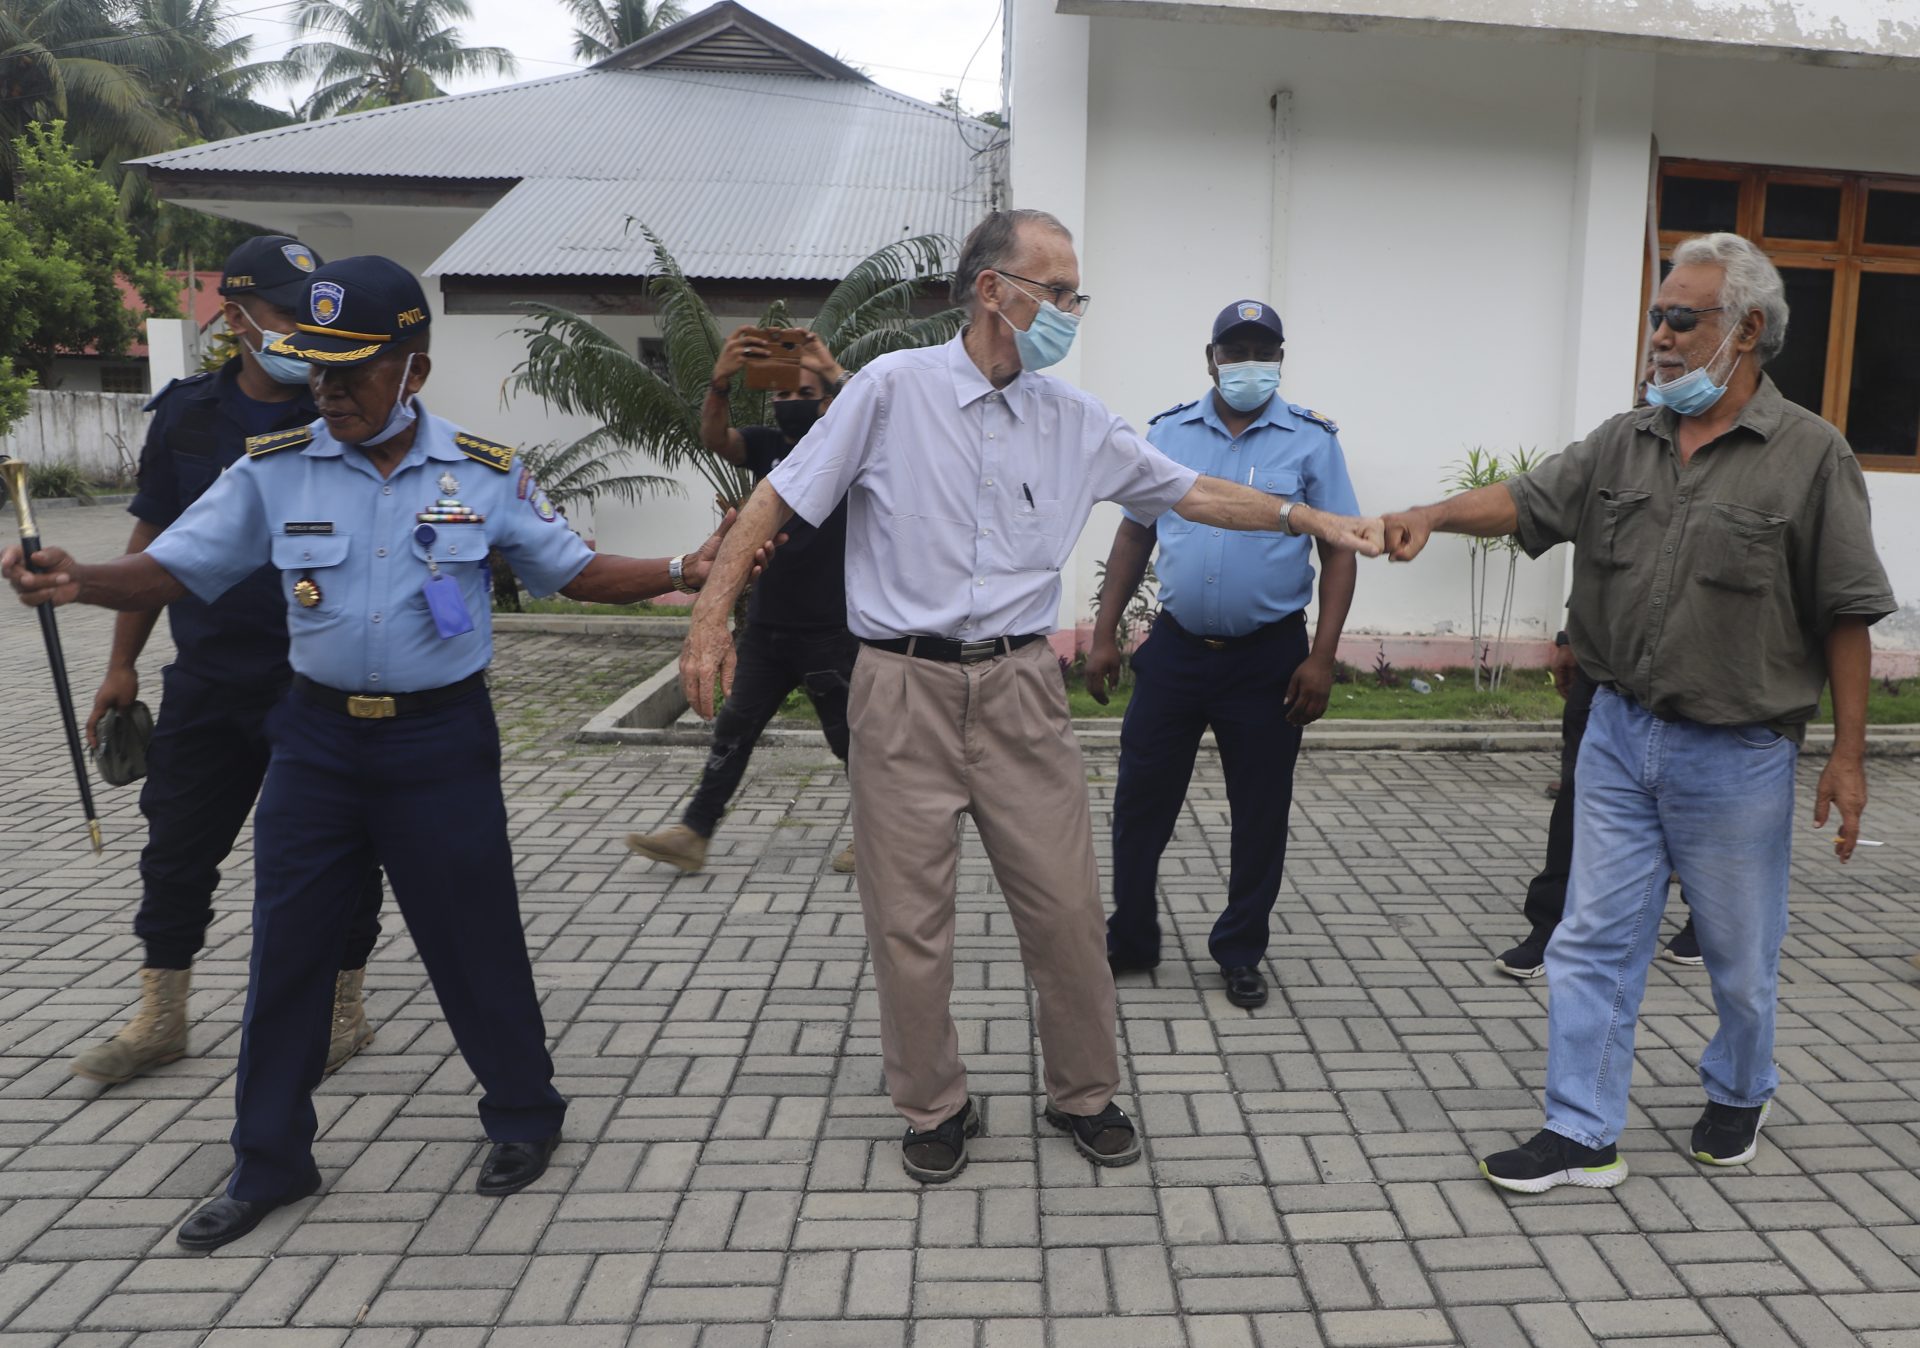 Xanana Gusmao, right, former East Timorese president and prime minister, gives a fist bump to Richard Daschbach, center, a defrocked priest originally from Pennsylvania accused of child abuse, after a hearing at a courthouse in Oecusse, East Timor, on Tuesday, Feb. 23, 2021.